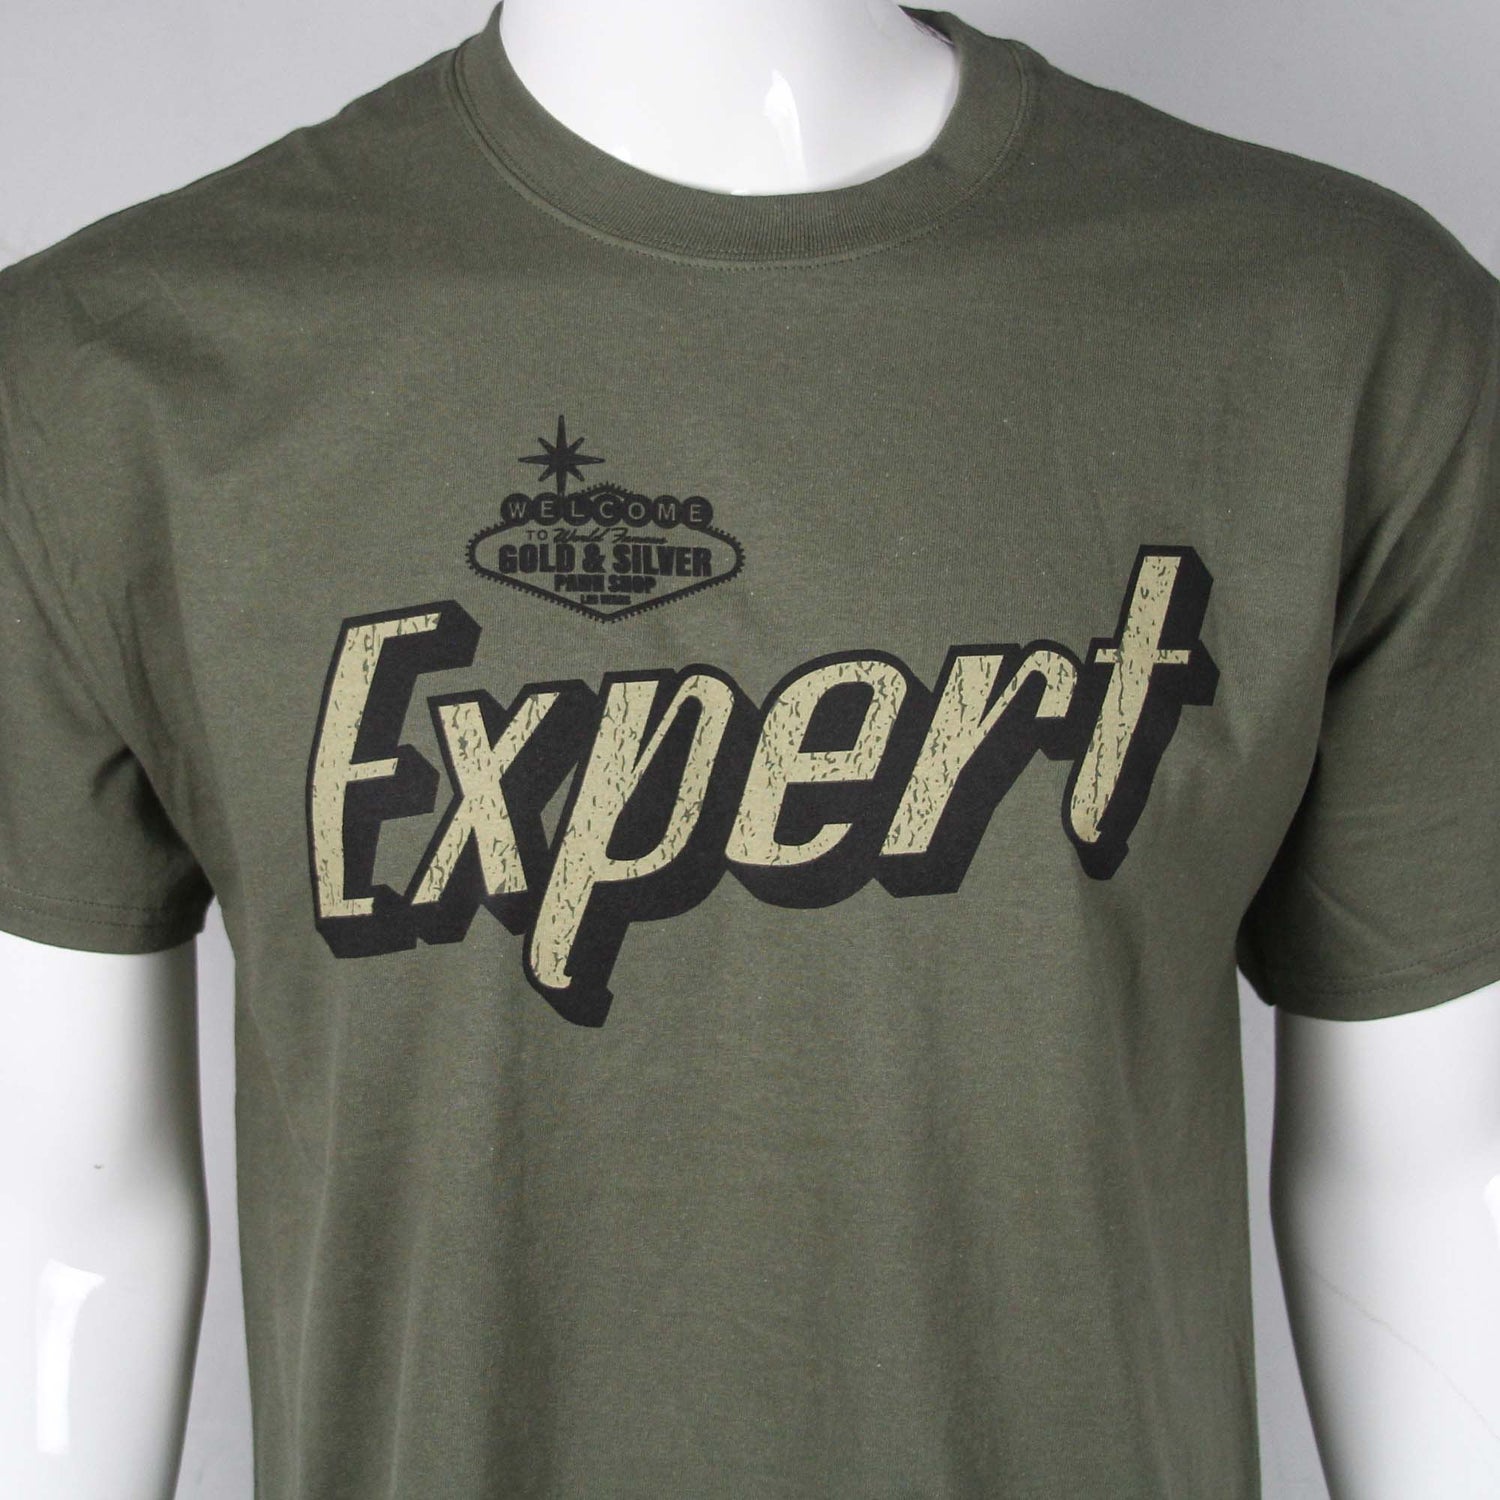 Gold & Silver Pawn Shop "Expert" Round Neck T-Shirt Front